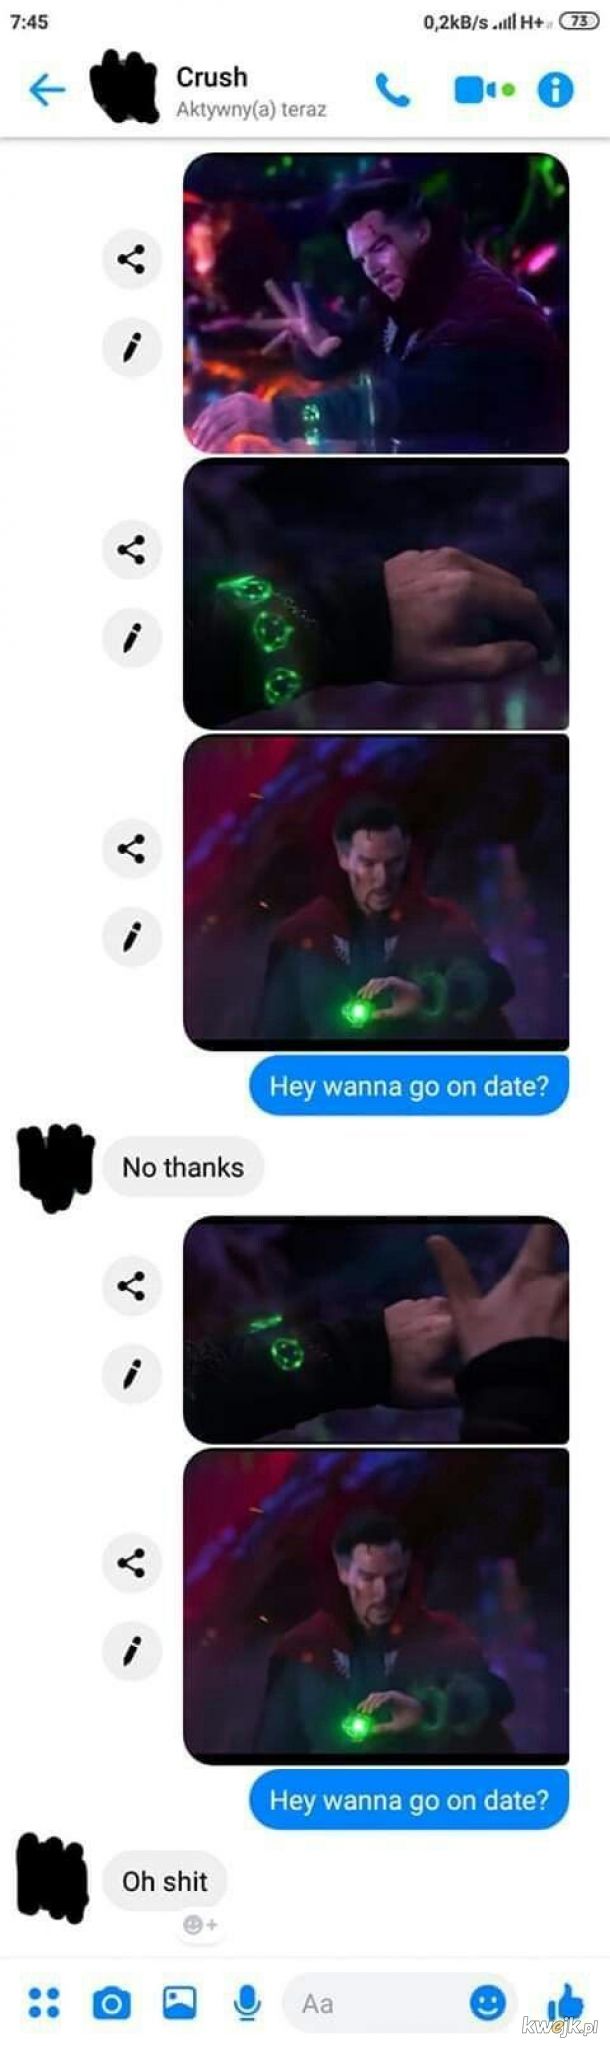 I've come to bargain